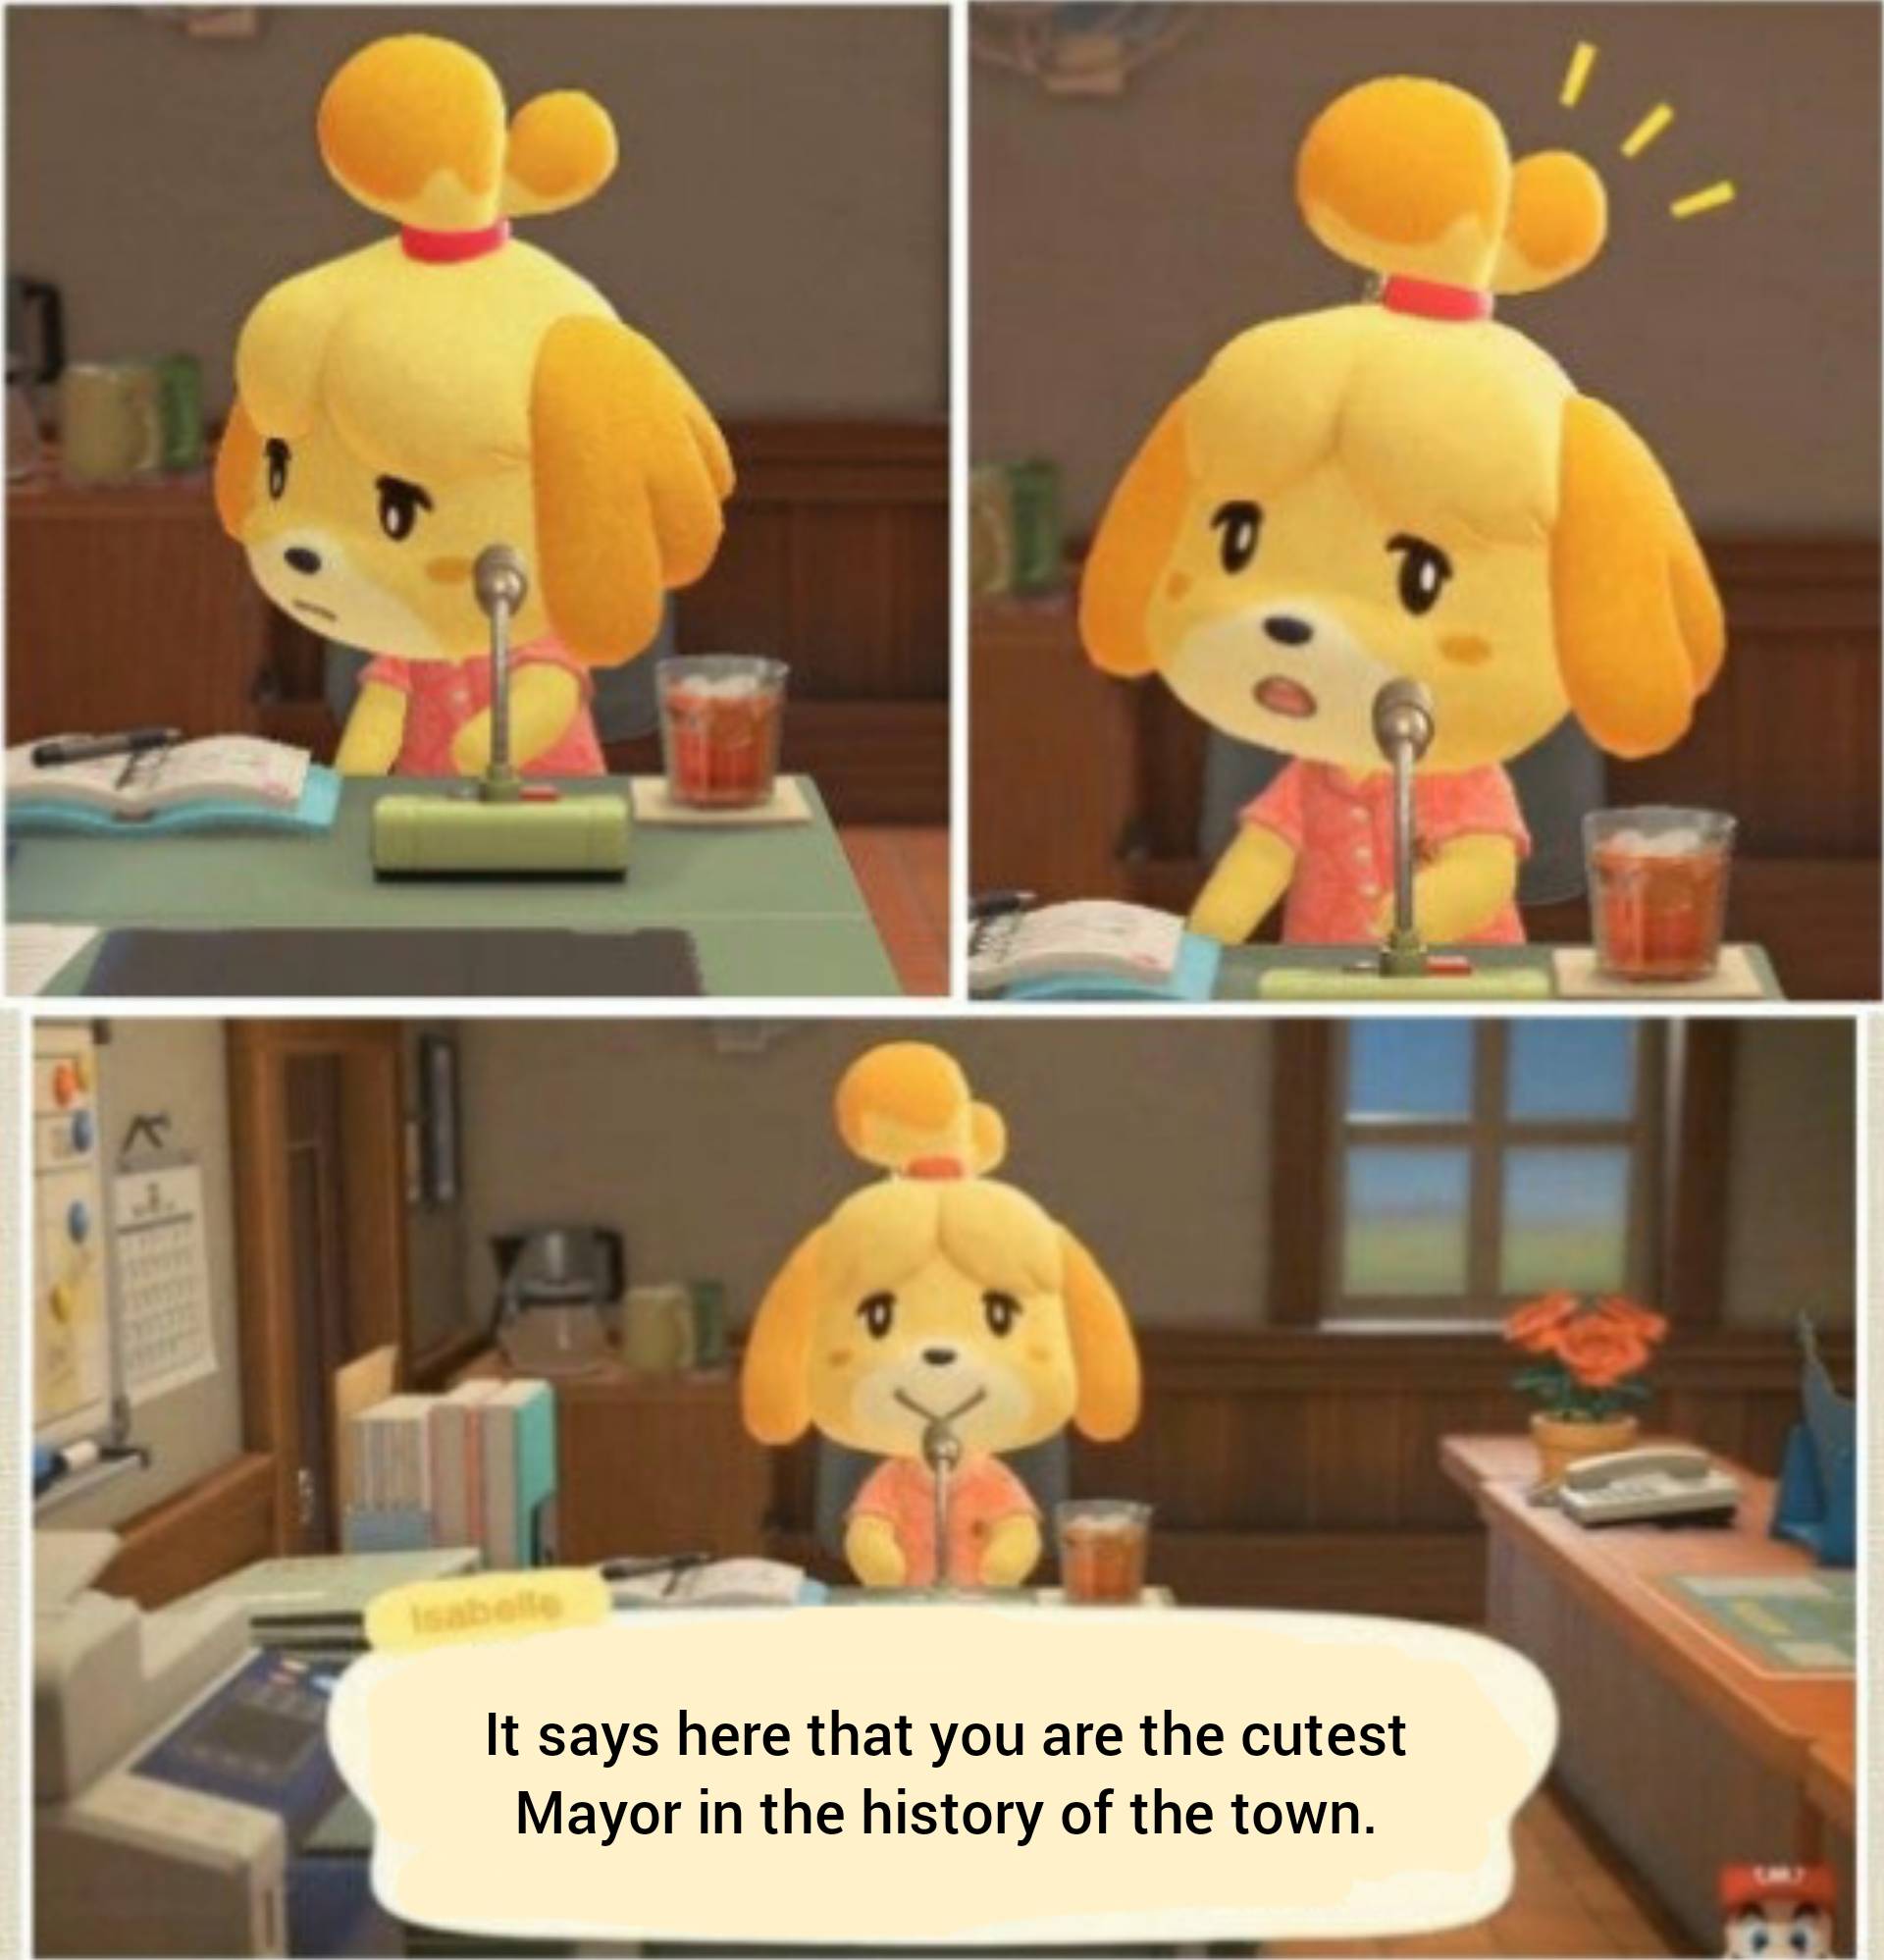 Animal Crossing - It says here that you are the cutest Mayor in the history of the town.